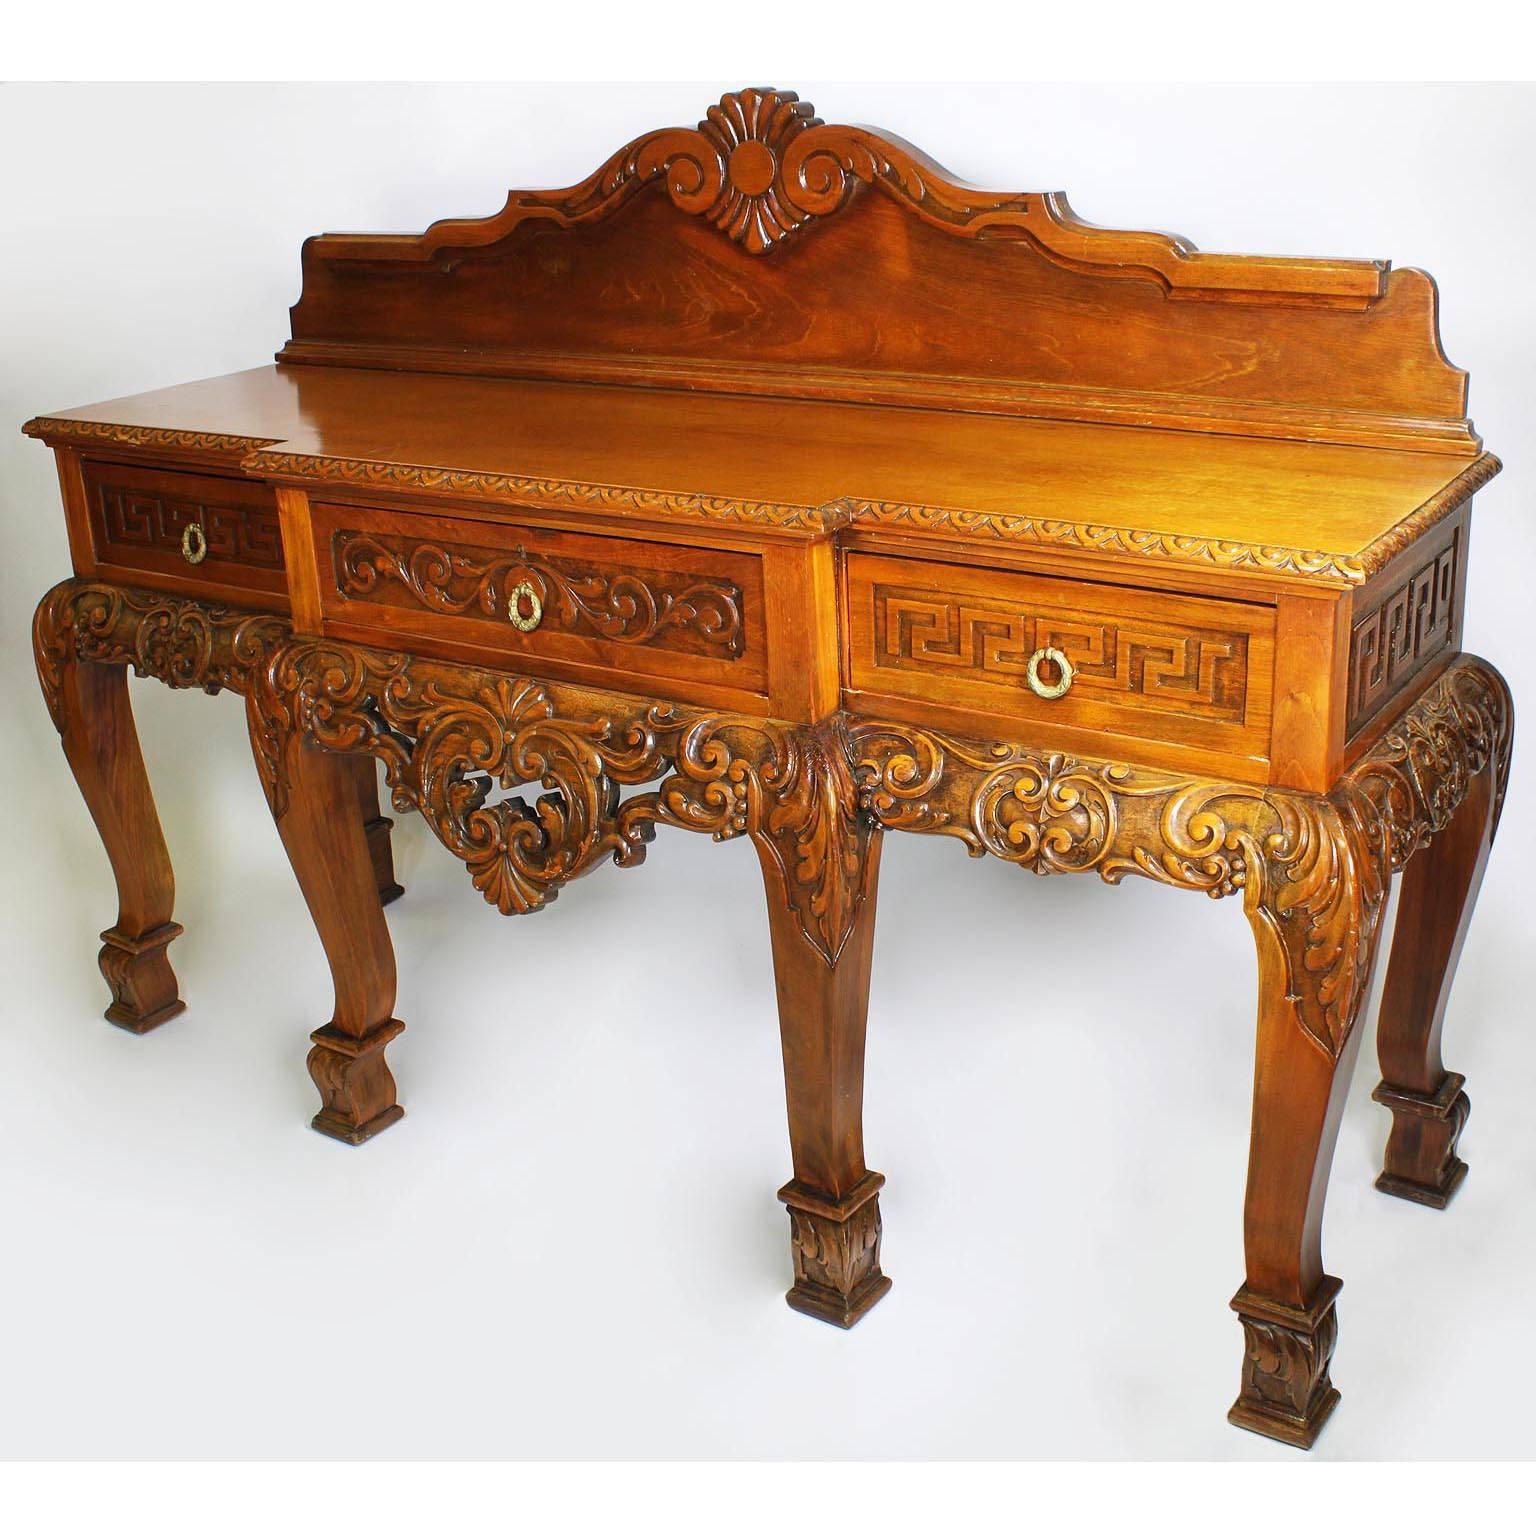 A large English 19th-20th century Chippendale style carved light-walnut three-drawer console - server buffet. The rectangular shaped body surmounted with a carved back molding, the floral carved three-drawer apron, the side drawers with a